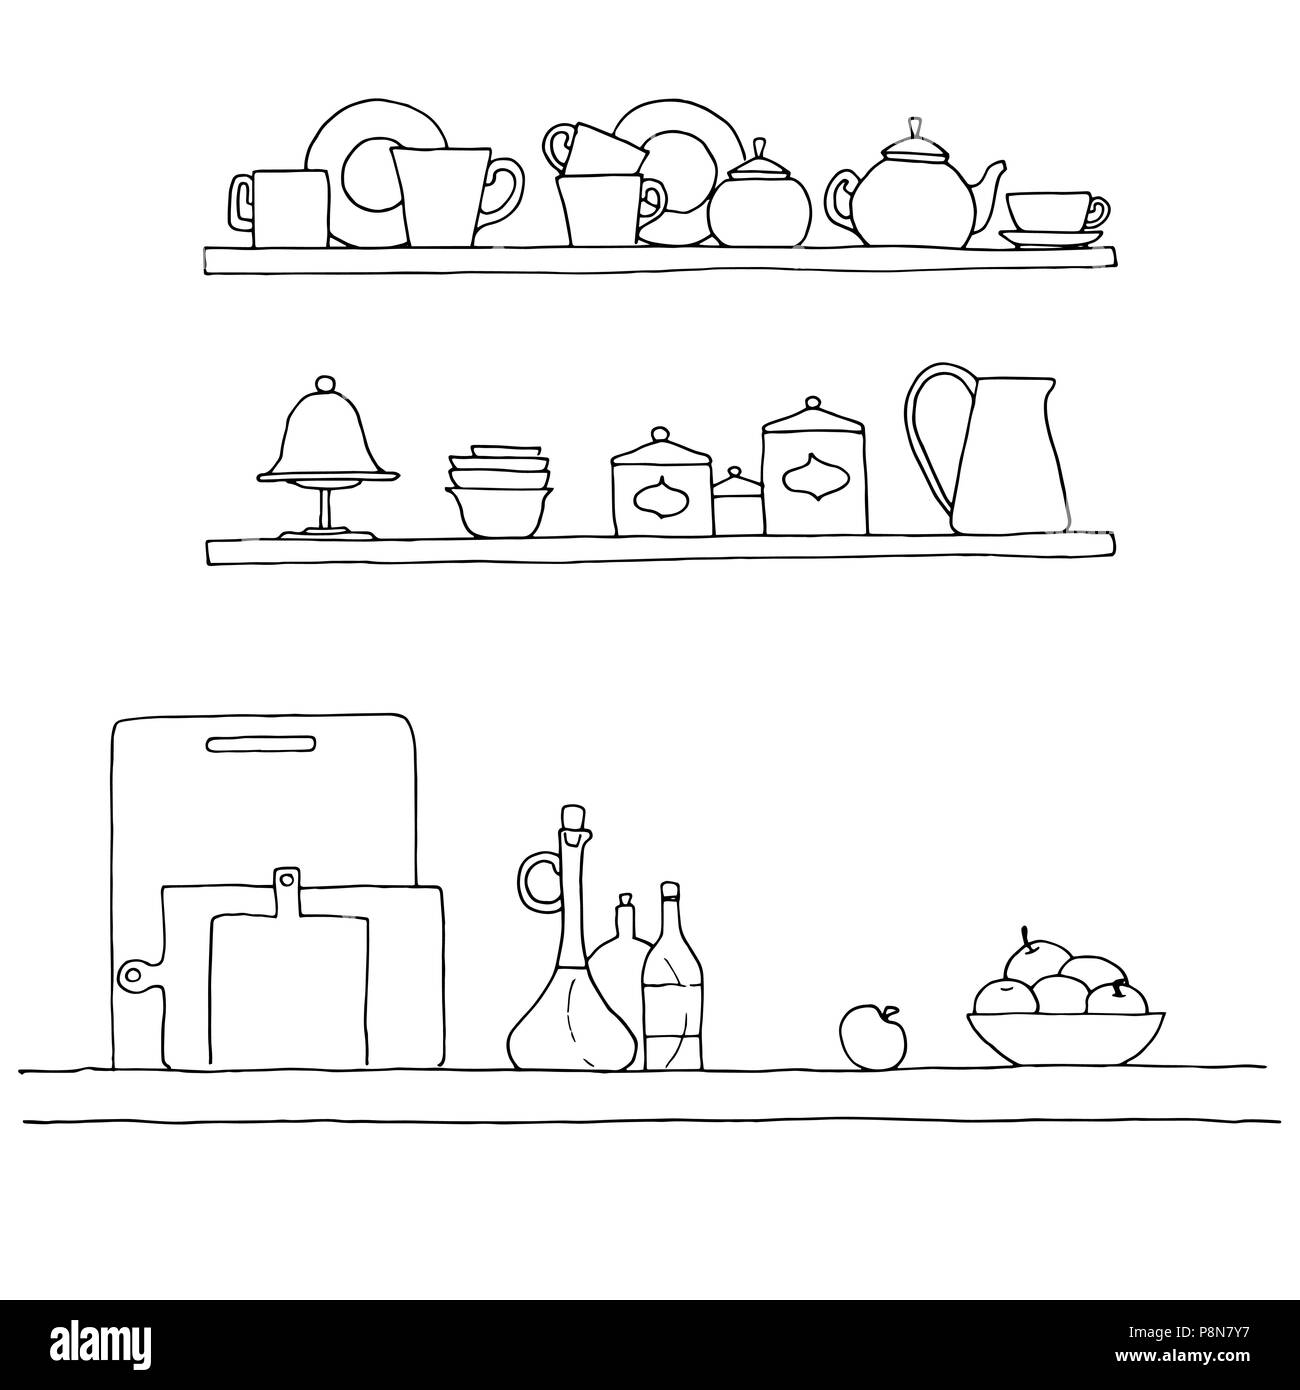 Sketch of shelves with different utensils. Vector illustration. Stock Vector